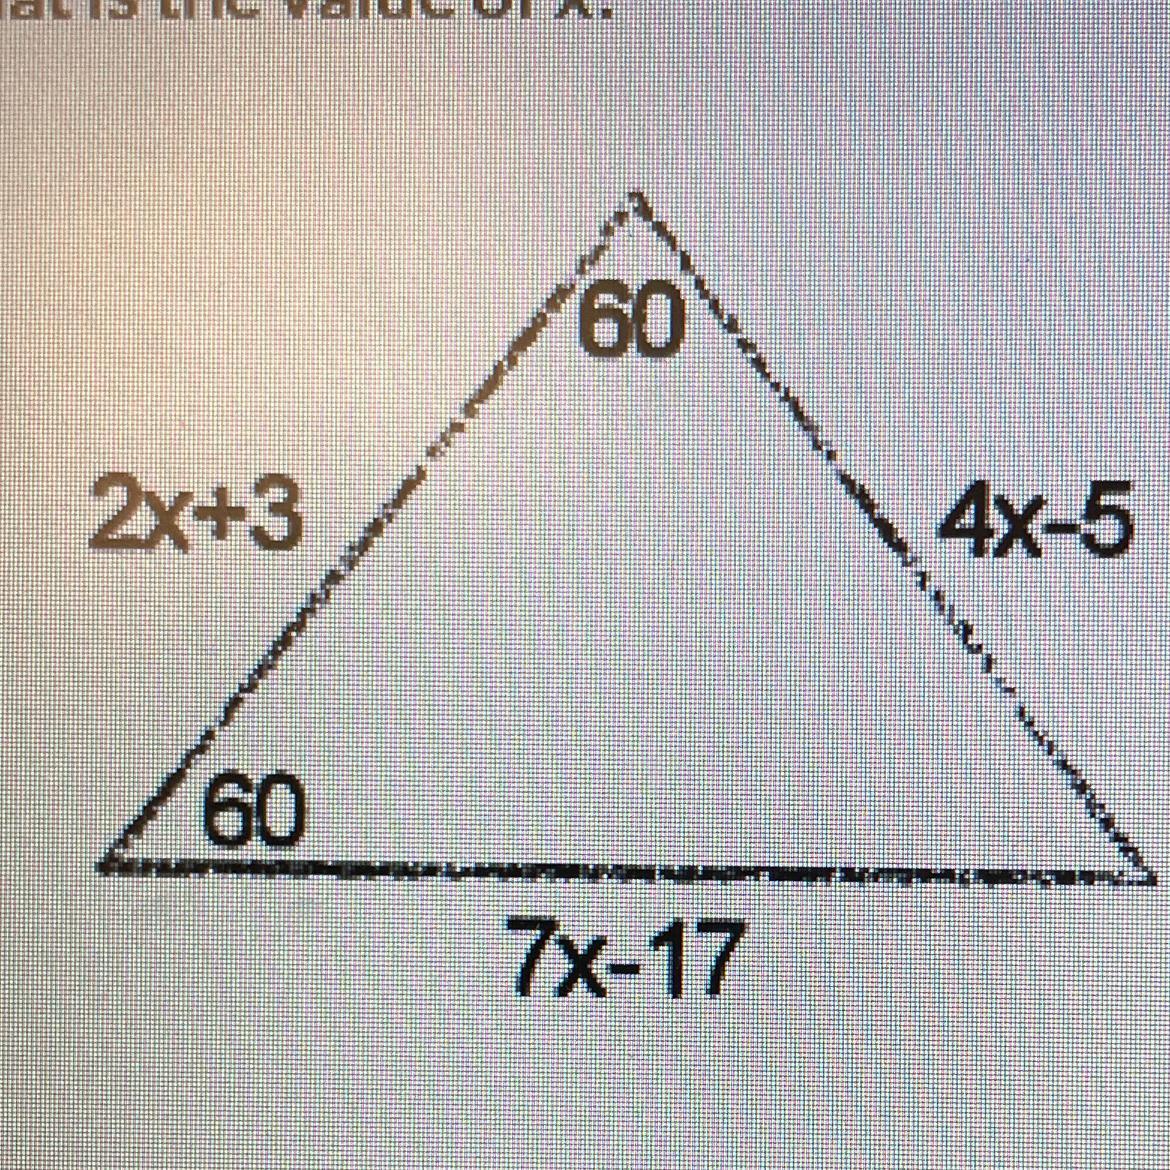 What Is The Value Of X